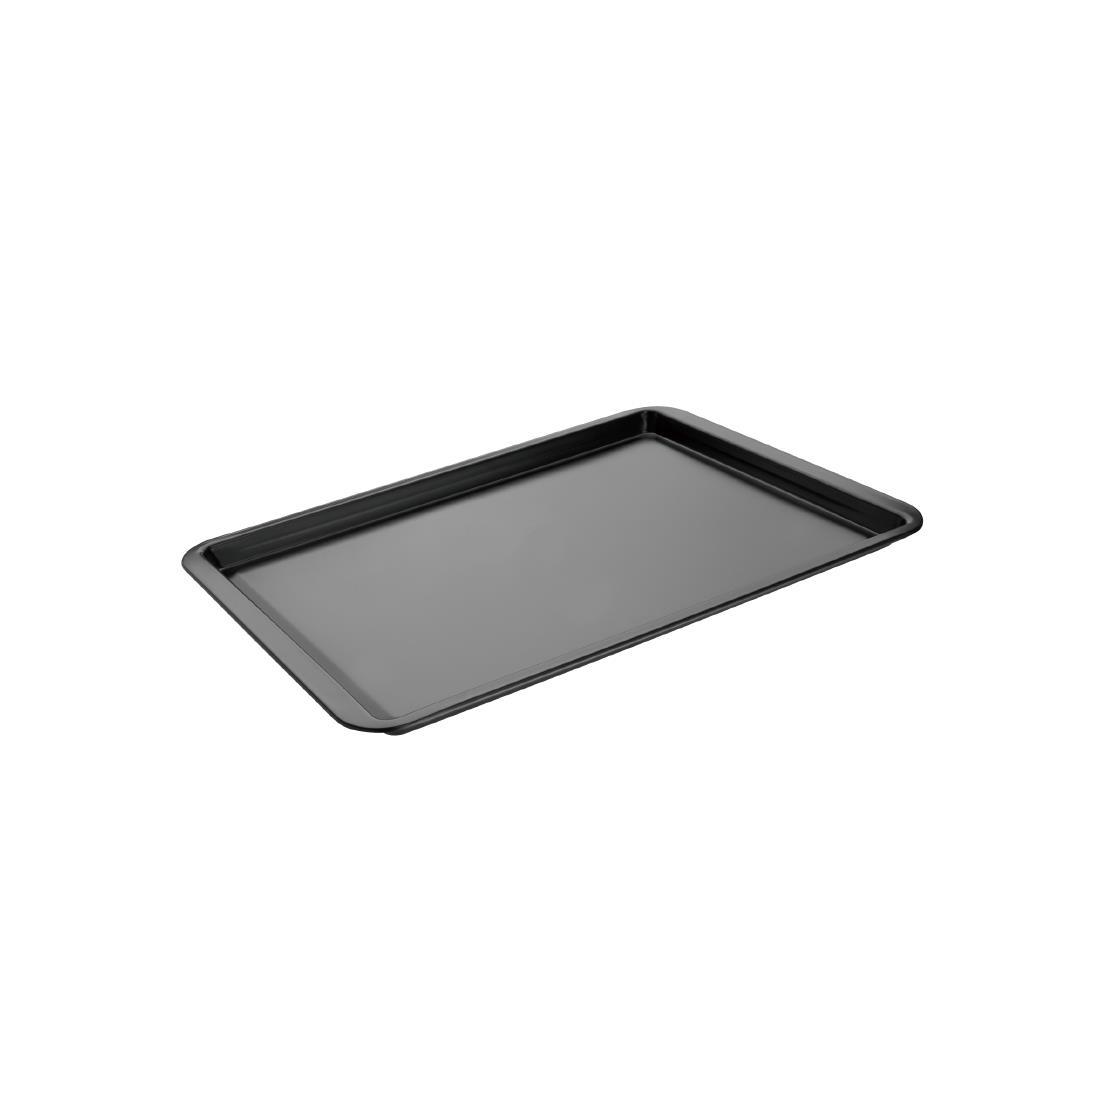 Vogue Non-Stick Carbon Steel Baking Tray 370 x 257mm - GD014  - 1